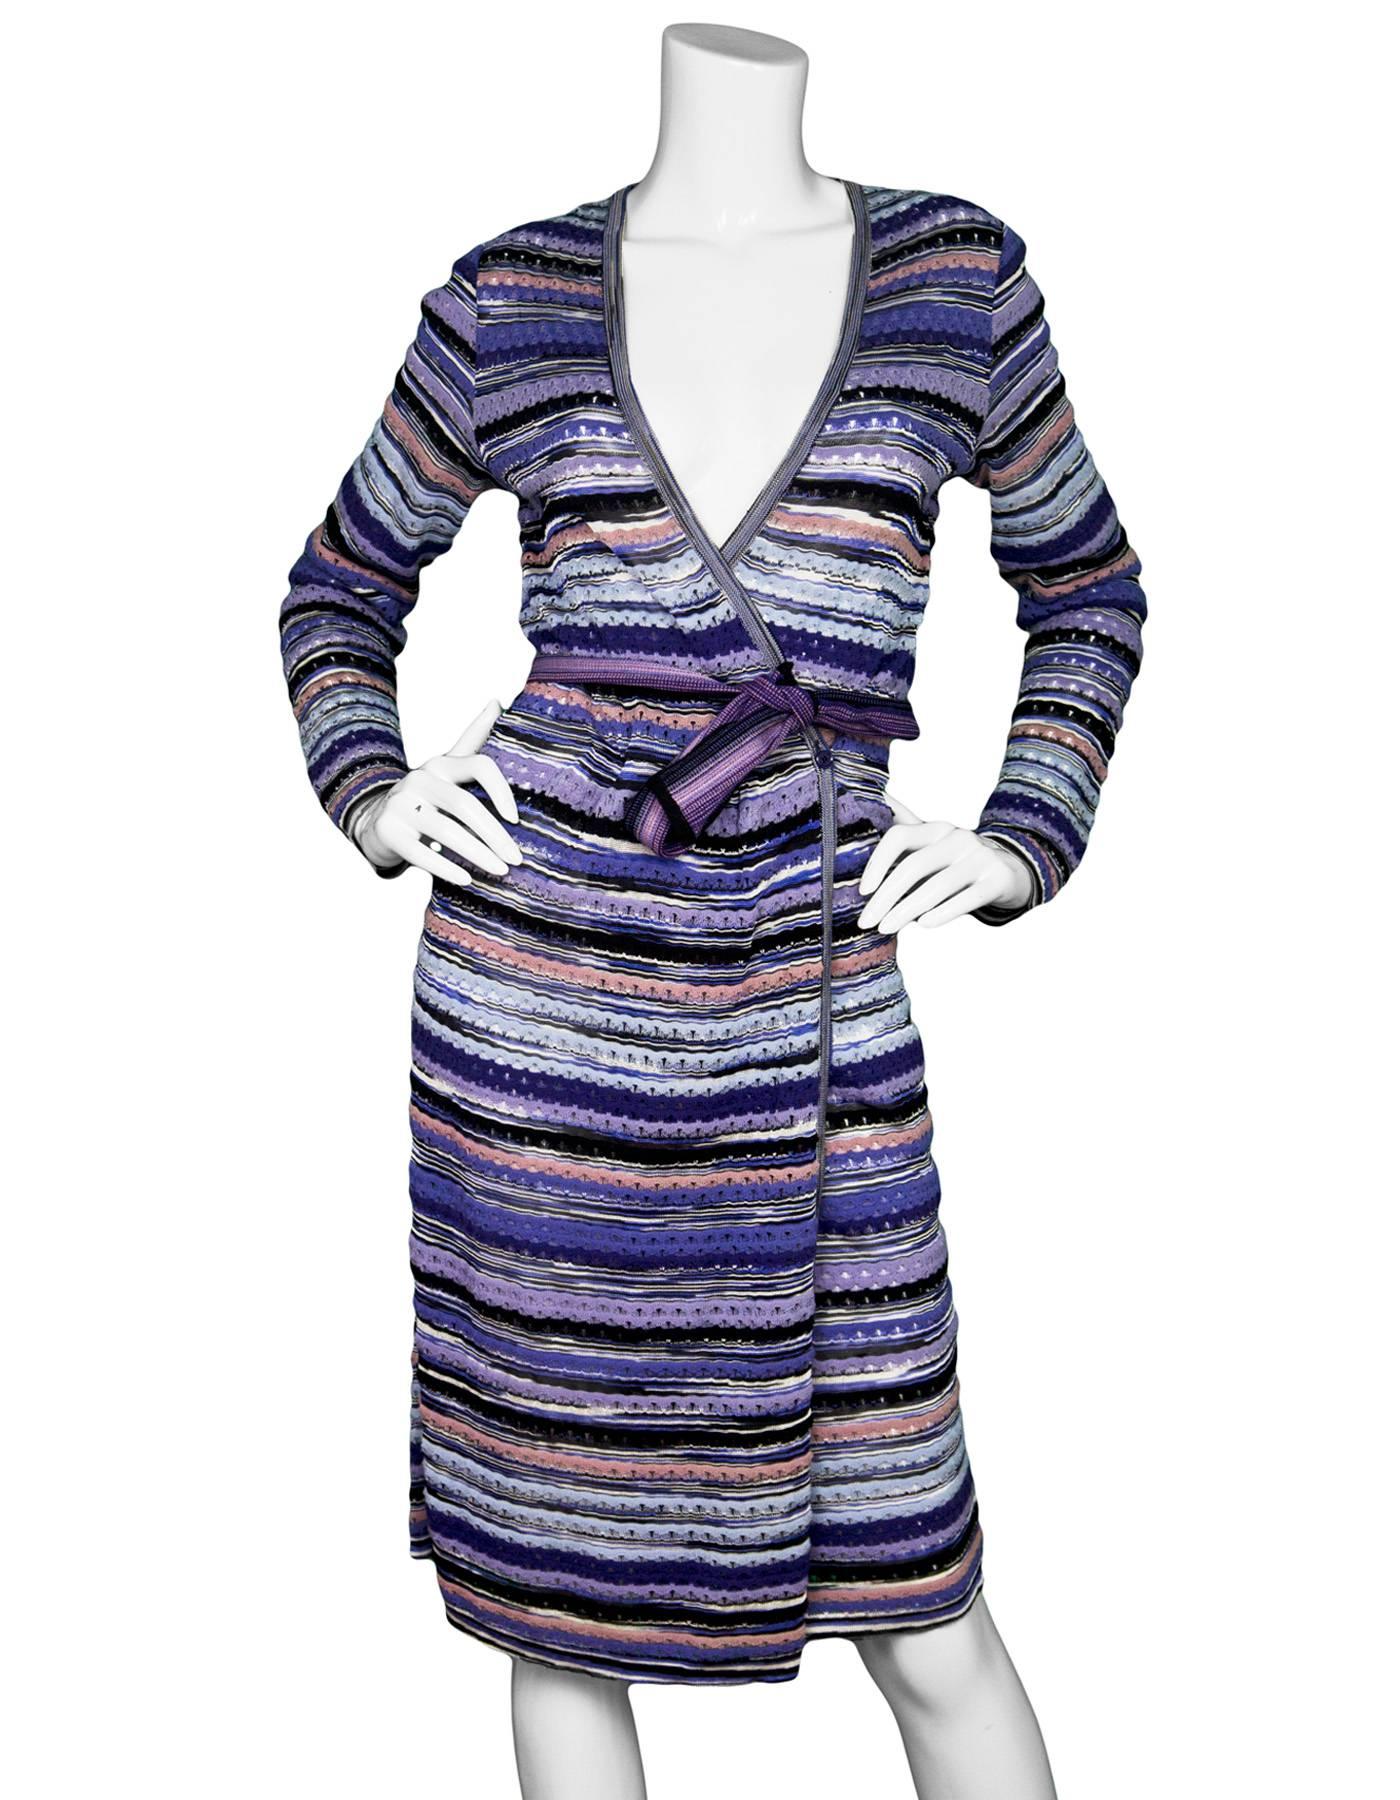 Missoni Purple Wrap Dress Sz IT46
Eyelet design - missing slip

Made In: Italy
Color: Purple
Composition: 55% wool, 40% rayon, 5% nylon
Lining: None
Closure/Opening: Button at waist
Overall Condition: Excellent pre-owned condition, gentle wear